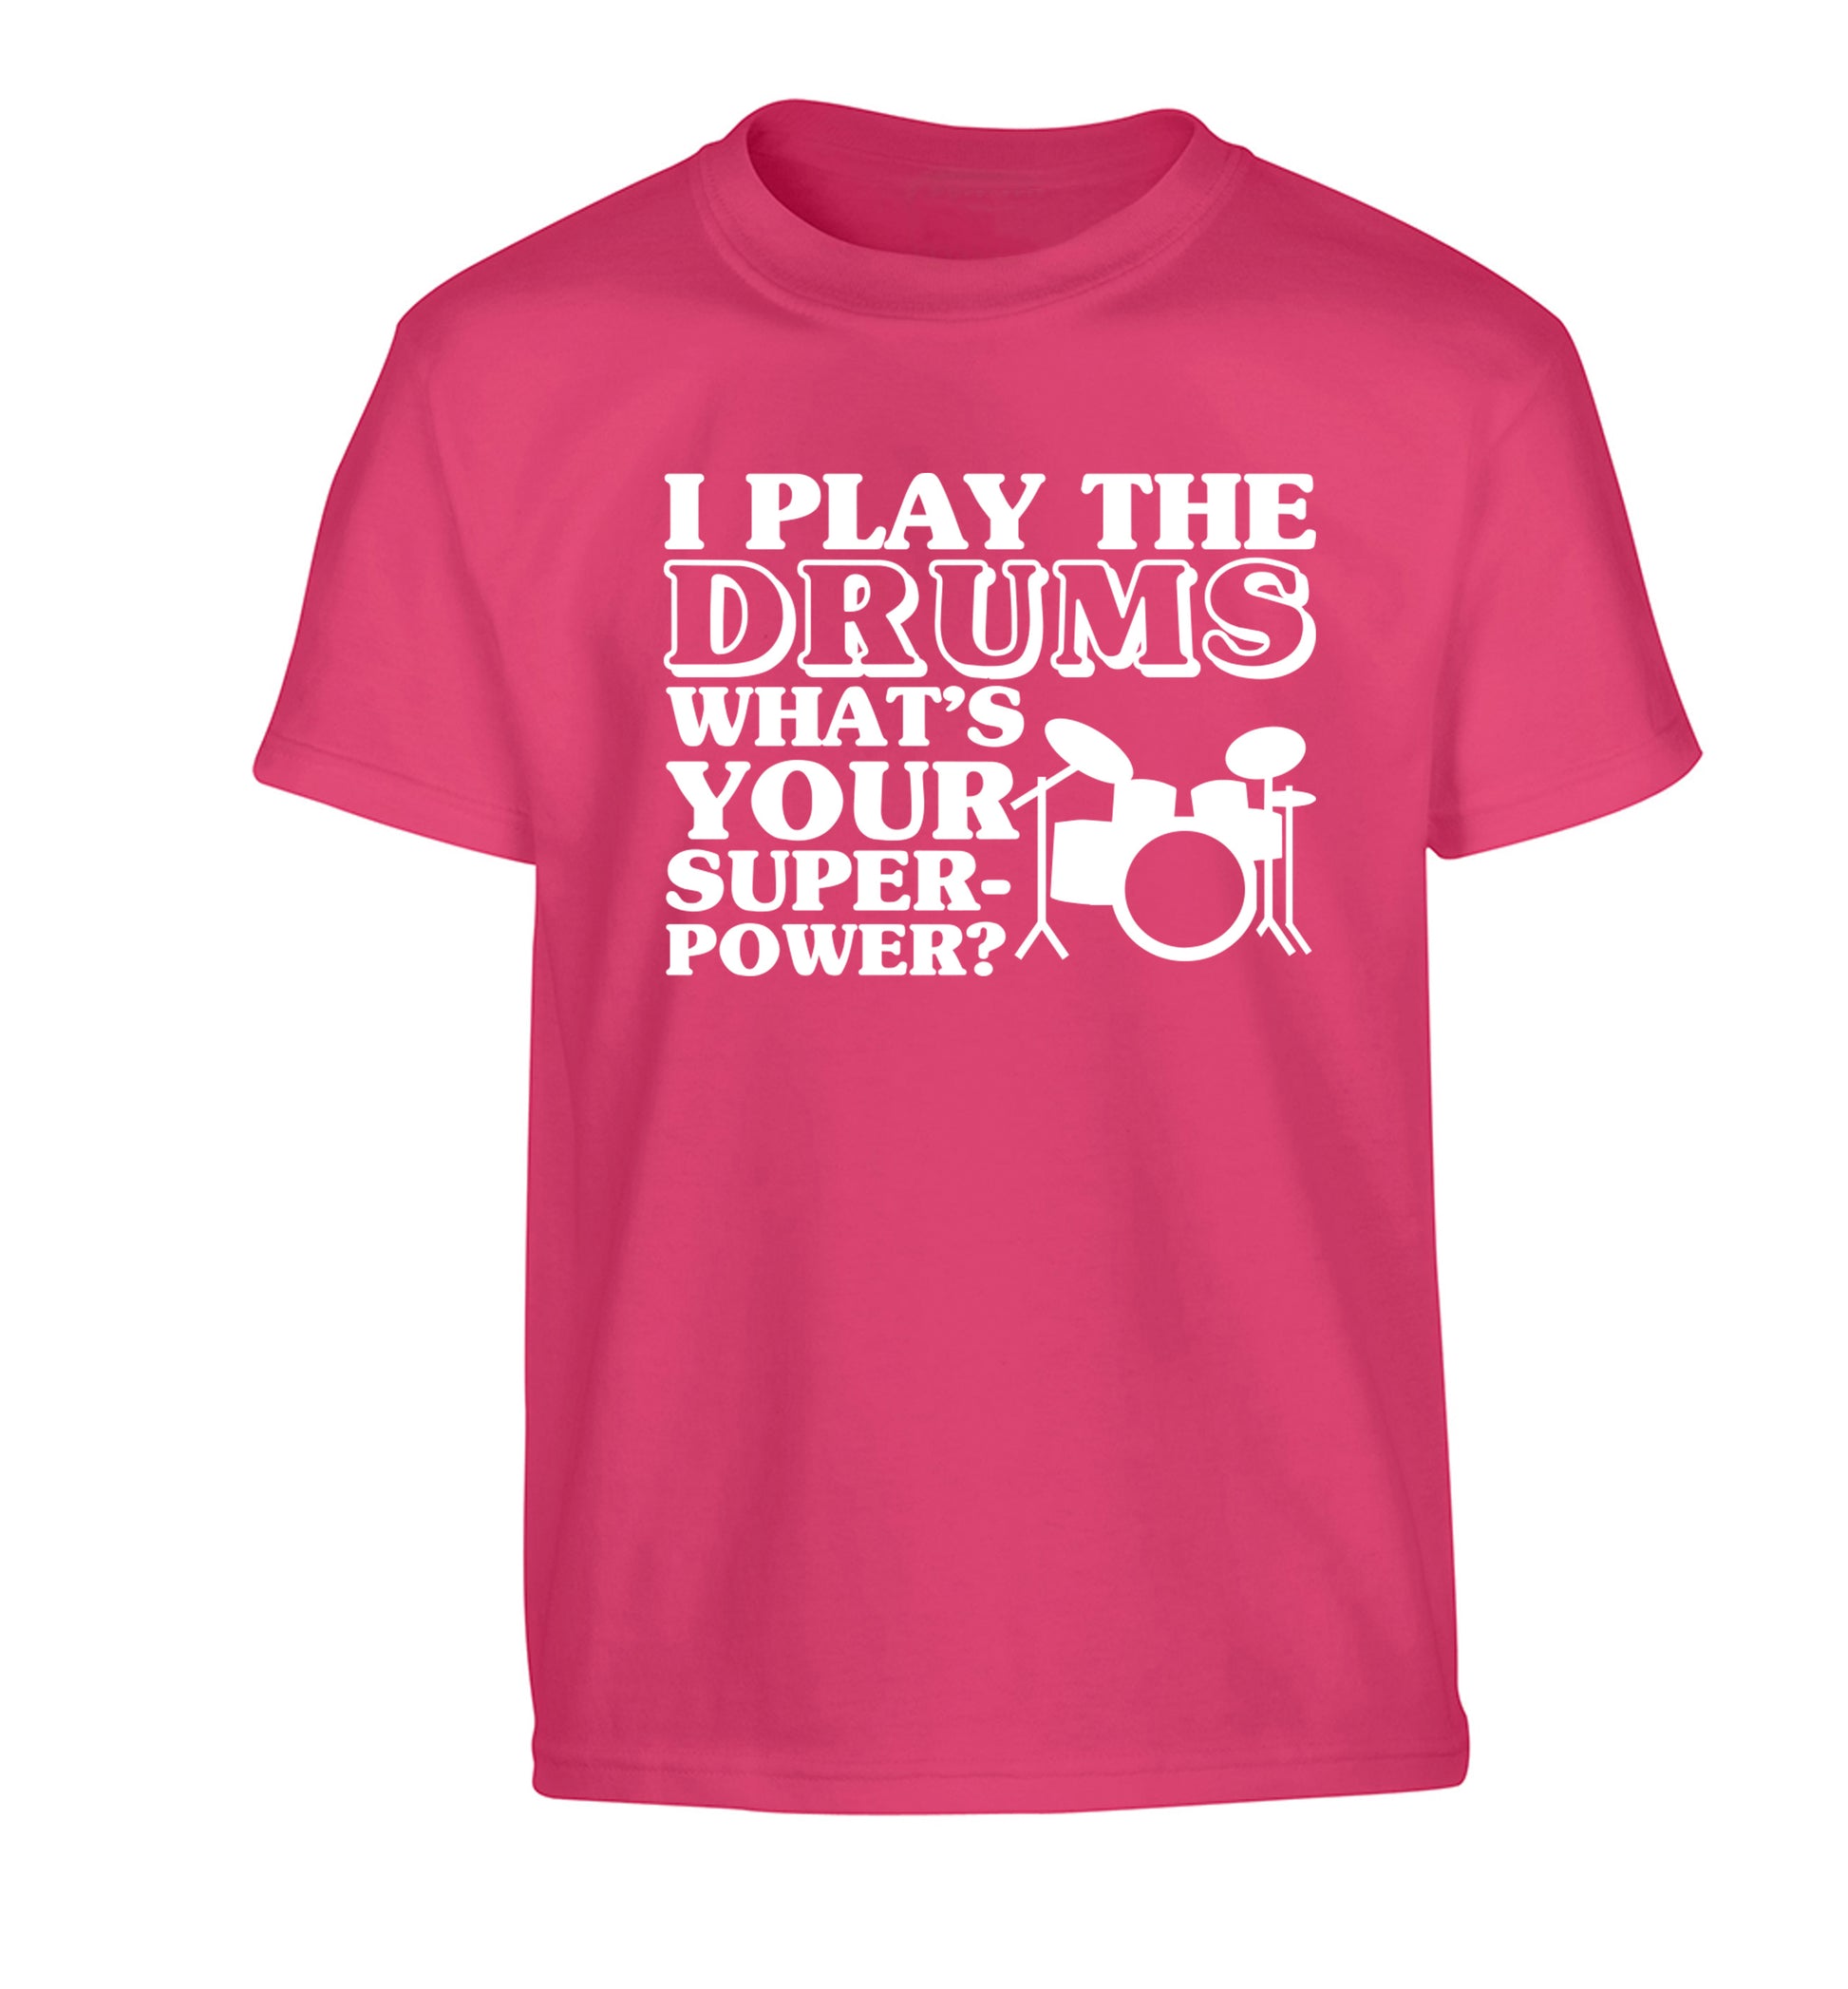 I play the drums what's your superpower? Children's pink Tshirt 12-14 Years